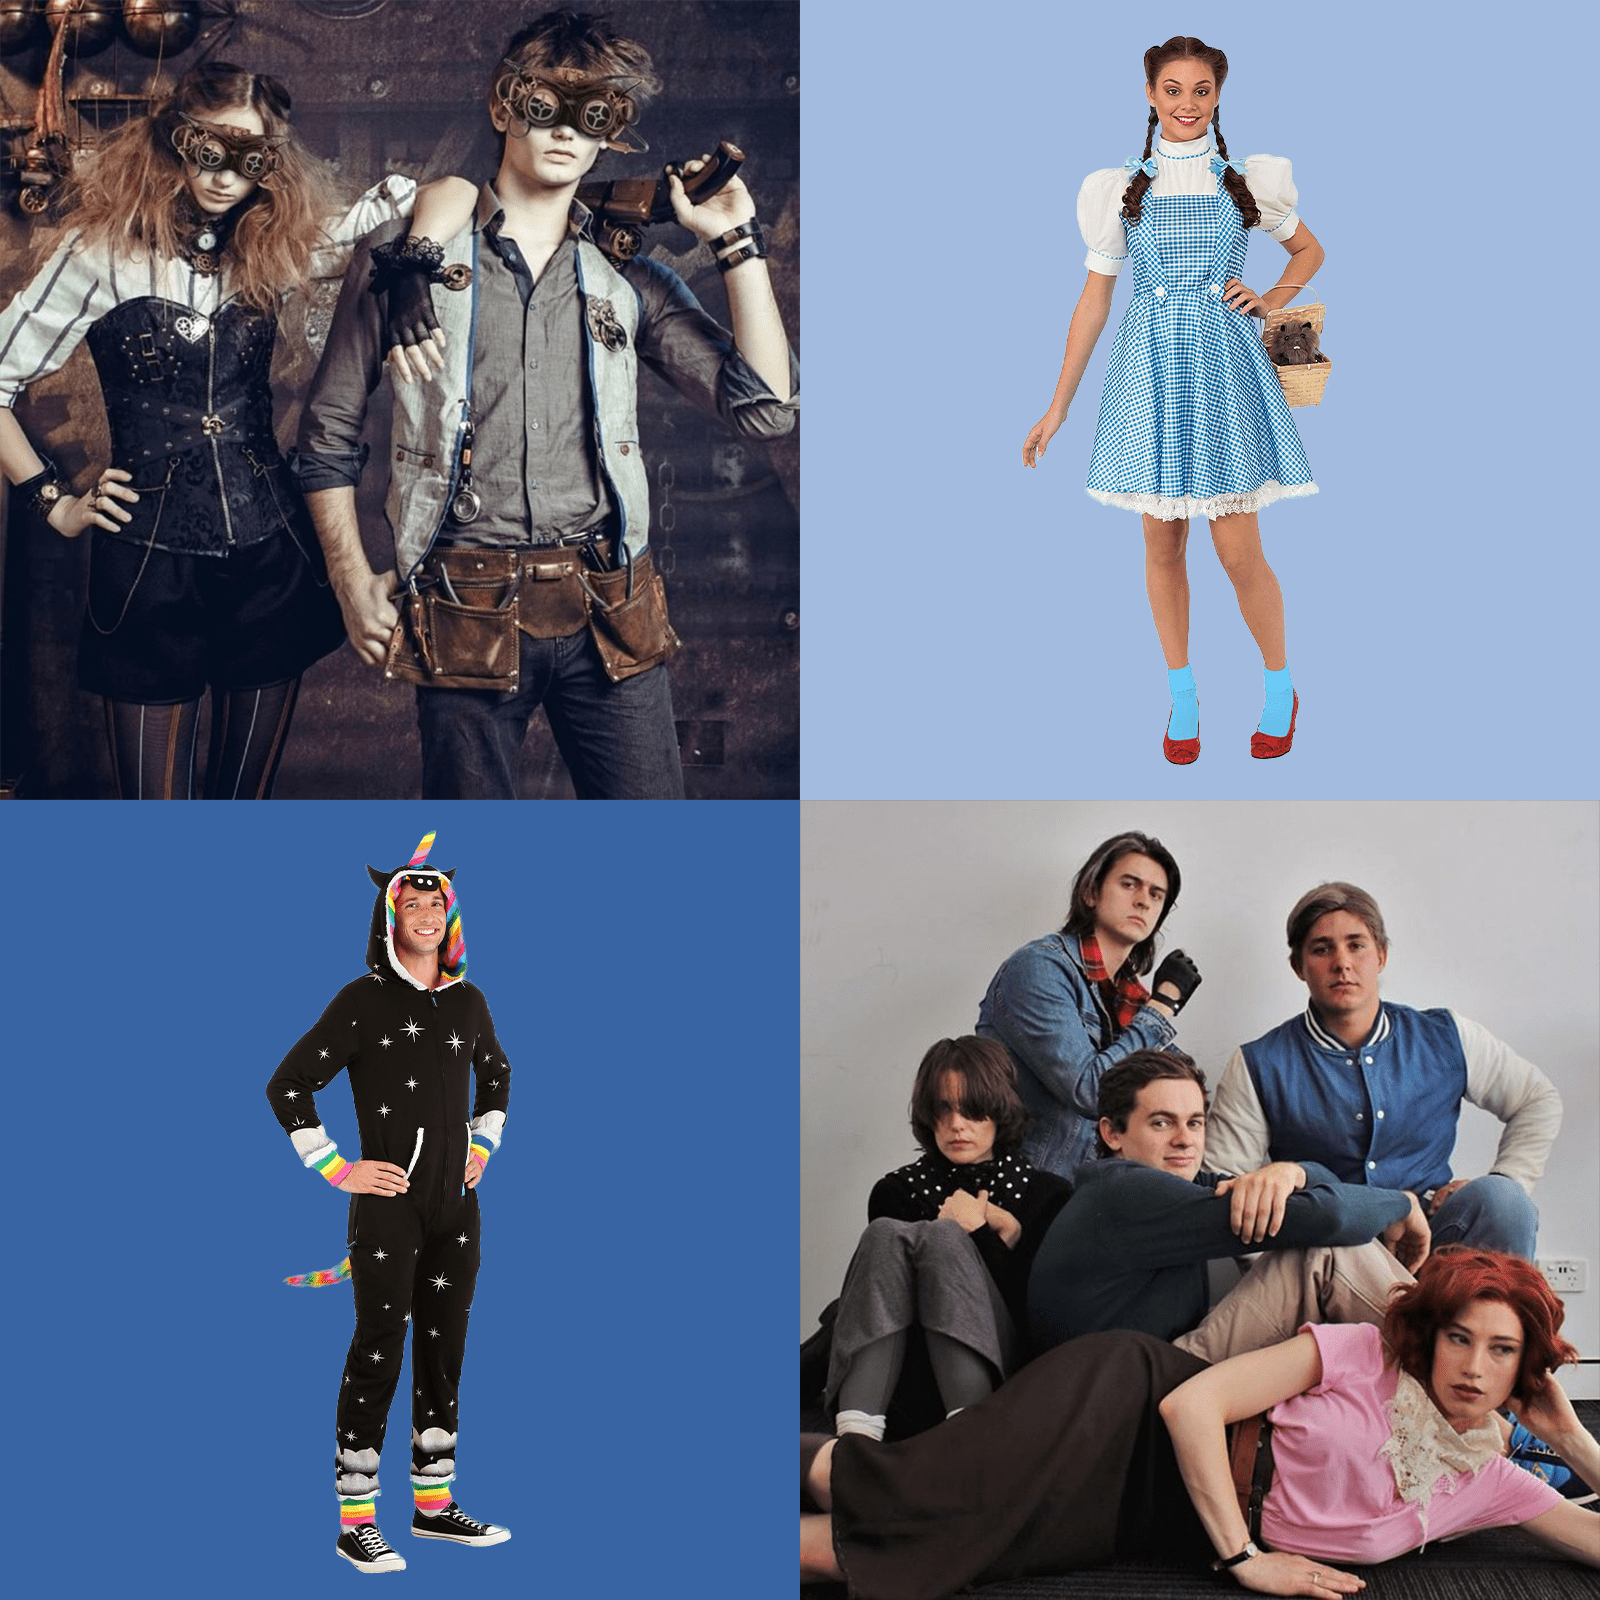 12 Fun Halloween Costume Ideas That Are Spooky And Cute